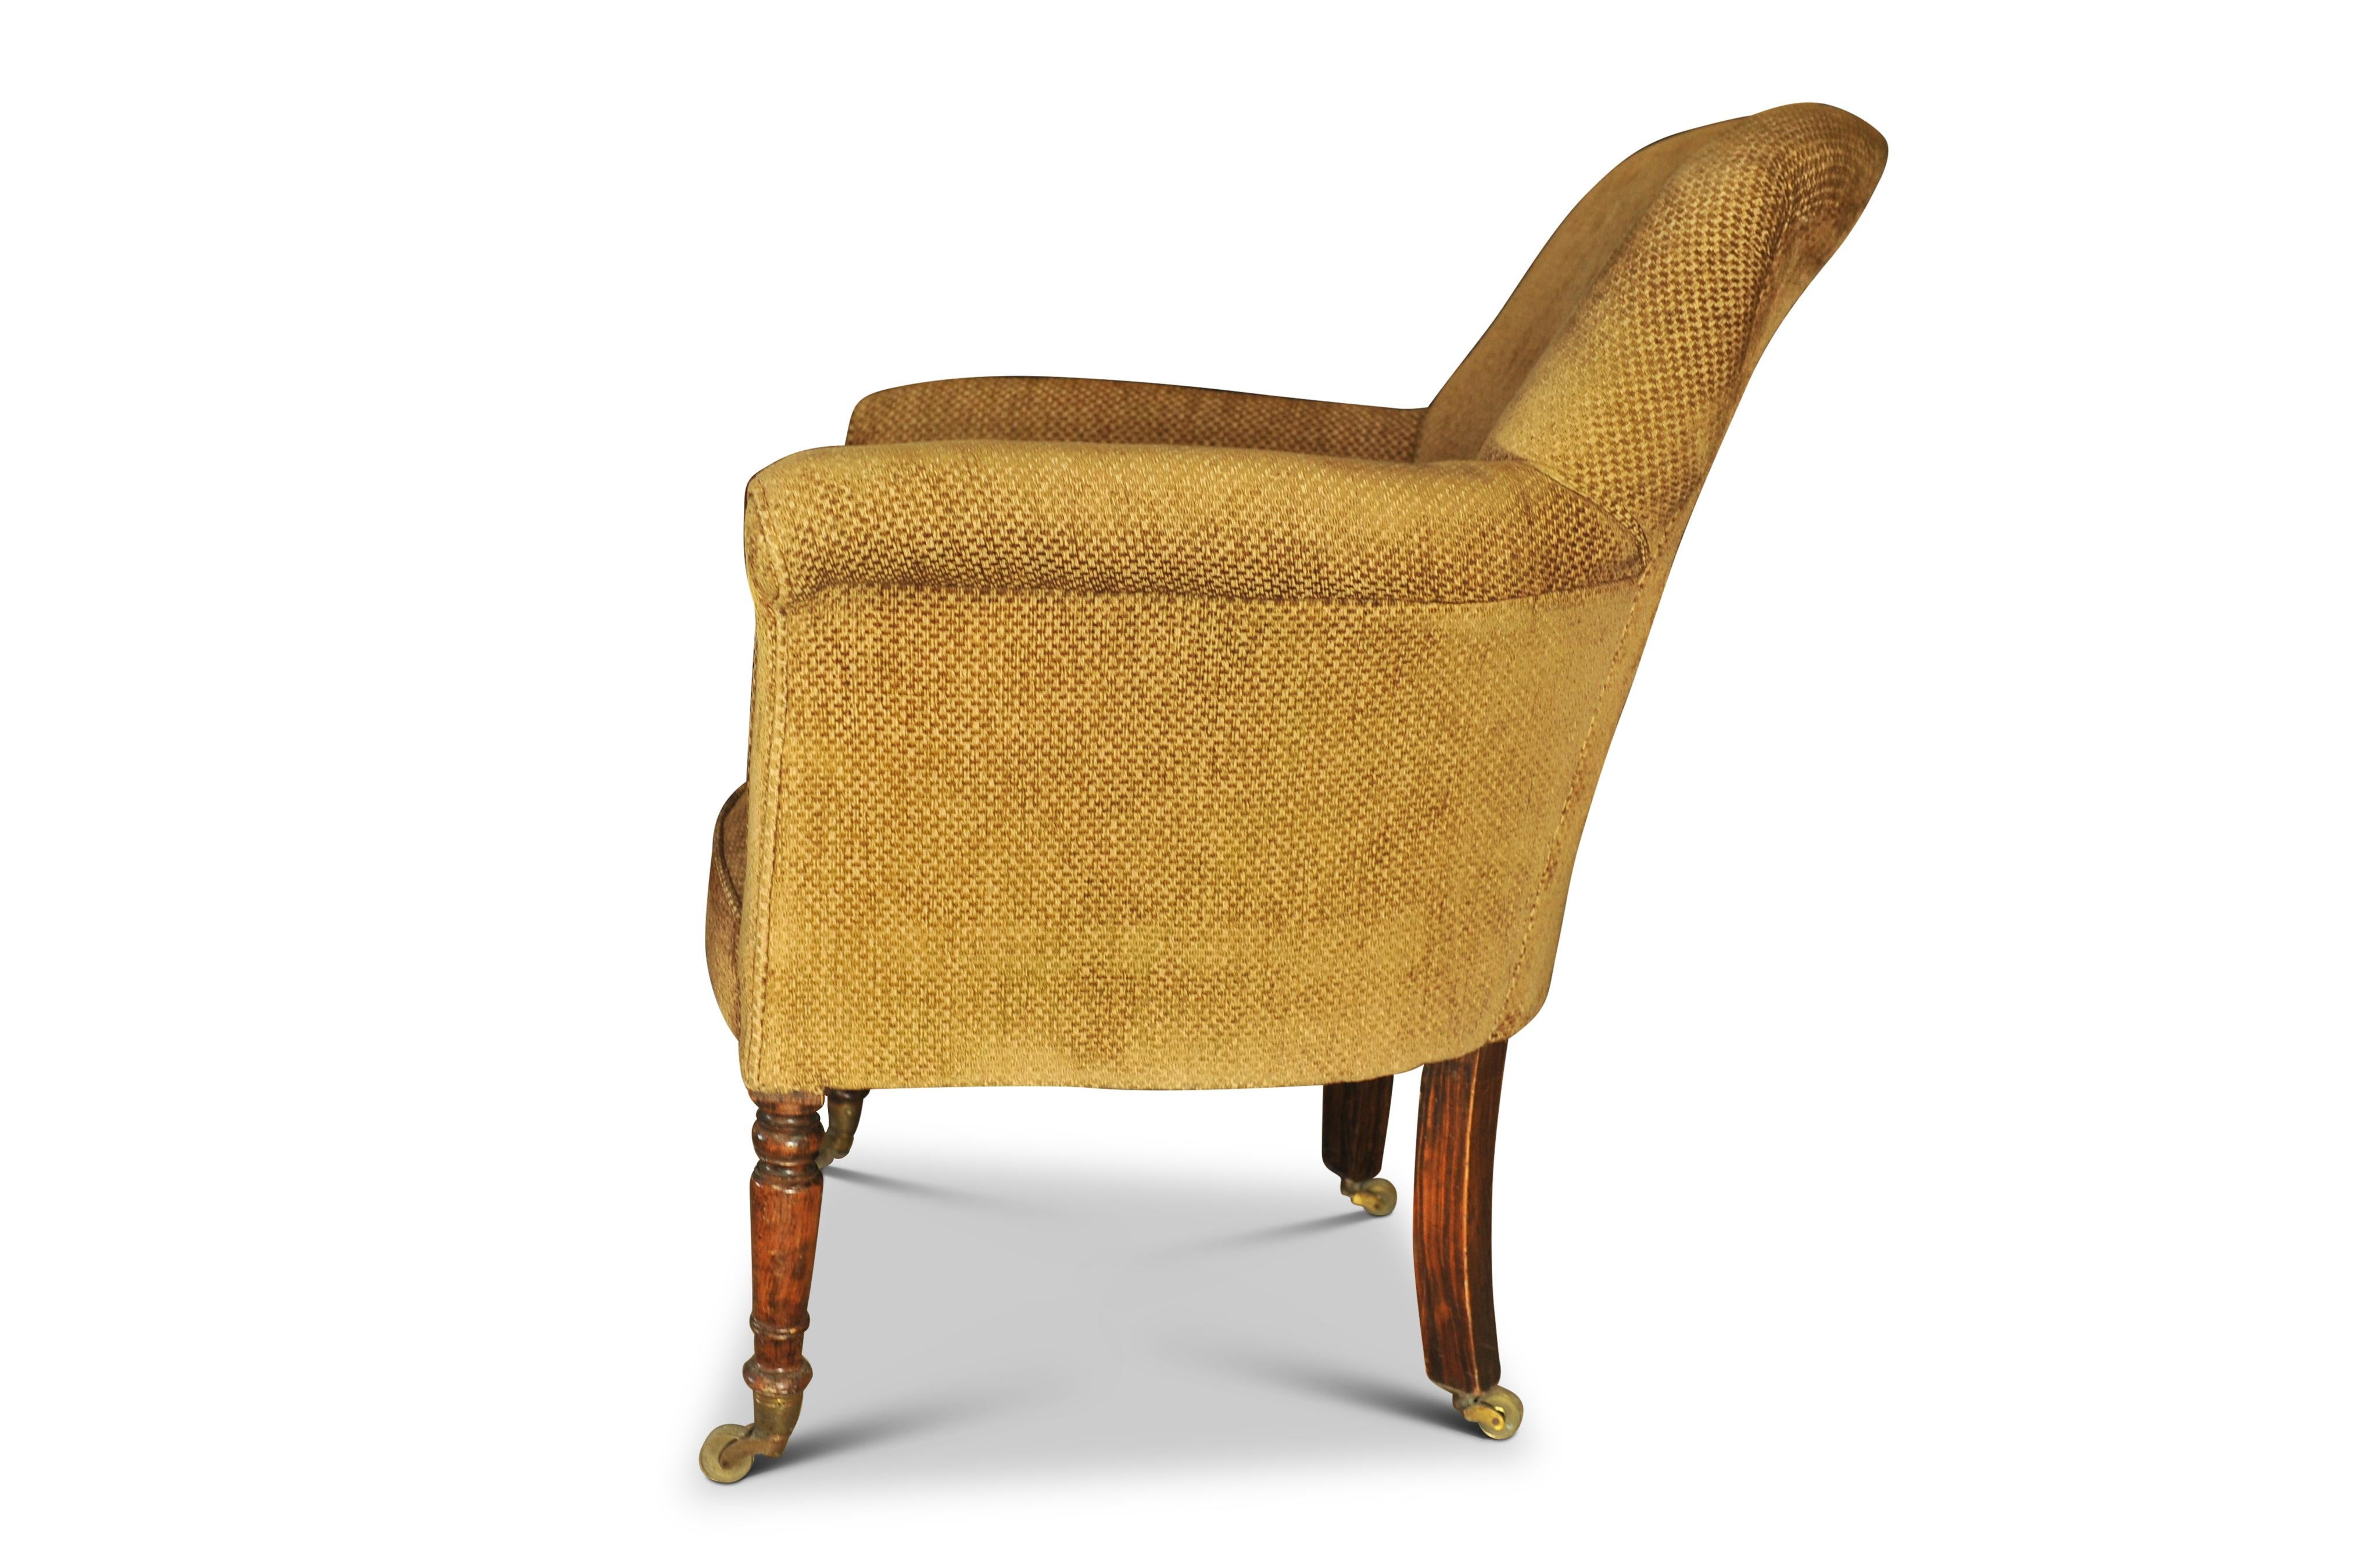 19th Century William IV Tub Chair On Brass Castors, Sabre Legs & Chenille Finish For Sale 1